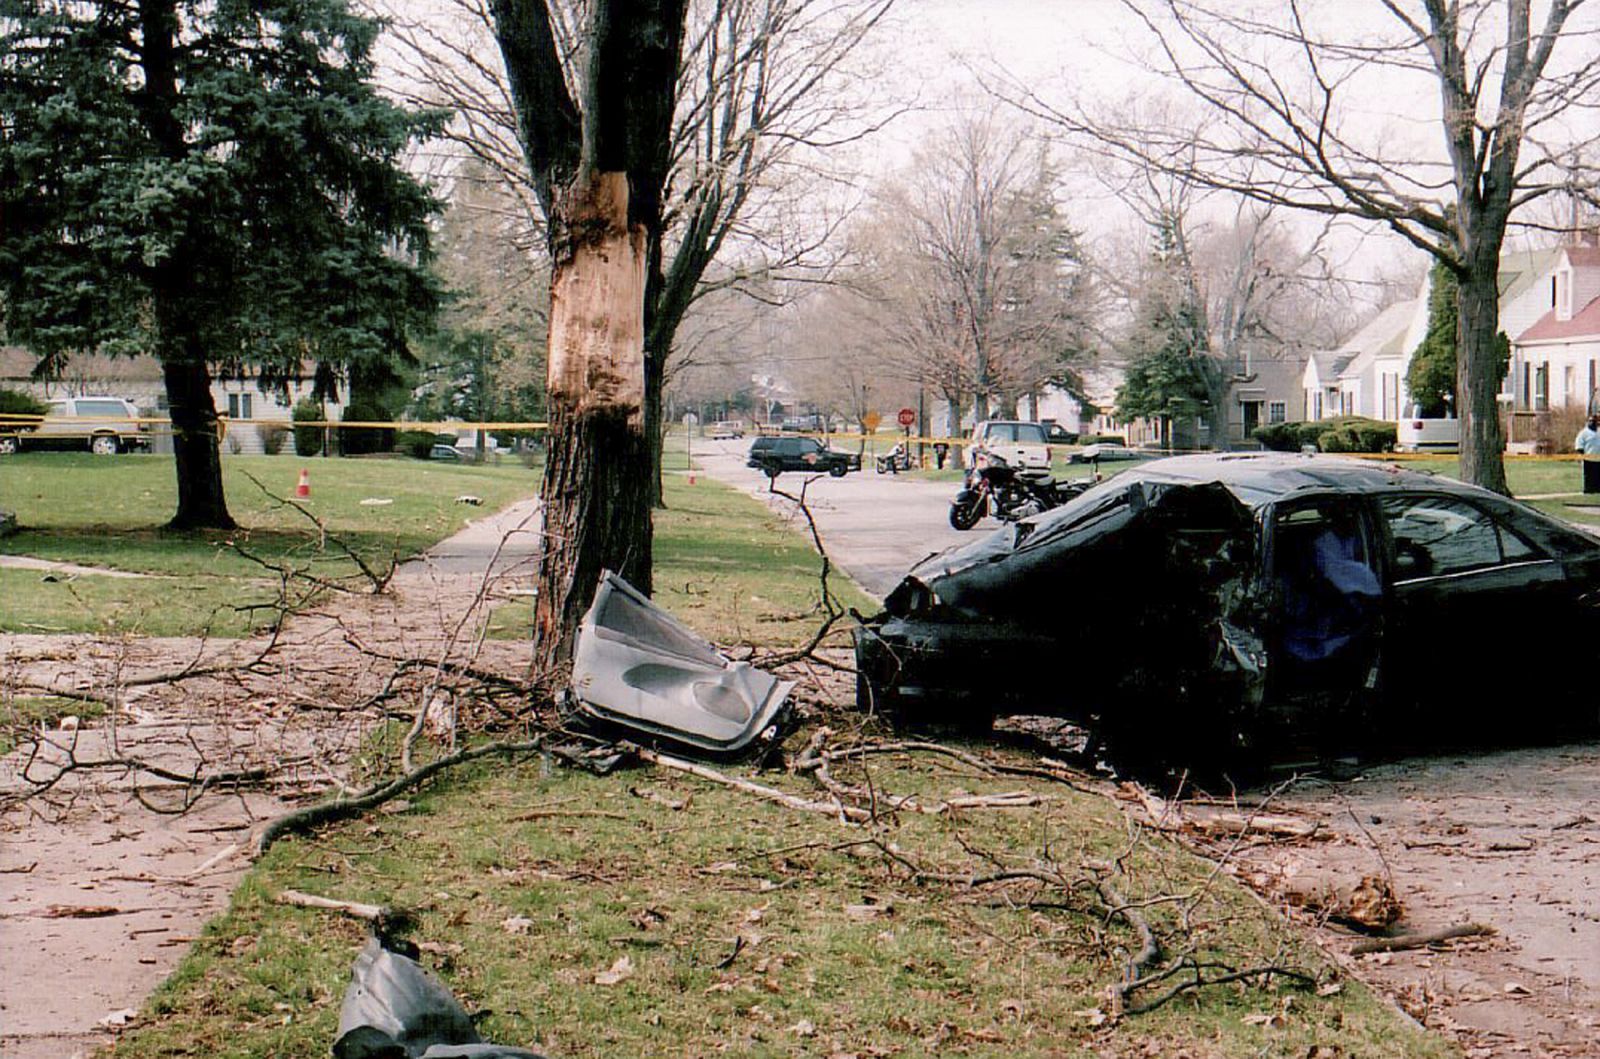 An accident picture provided by the lawyers representing the family of Guadalupe Alberto, of the wreckage of a 2005 Toyota Camry following crash in Flint